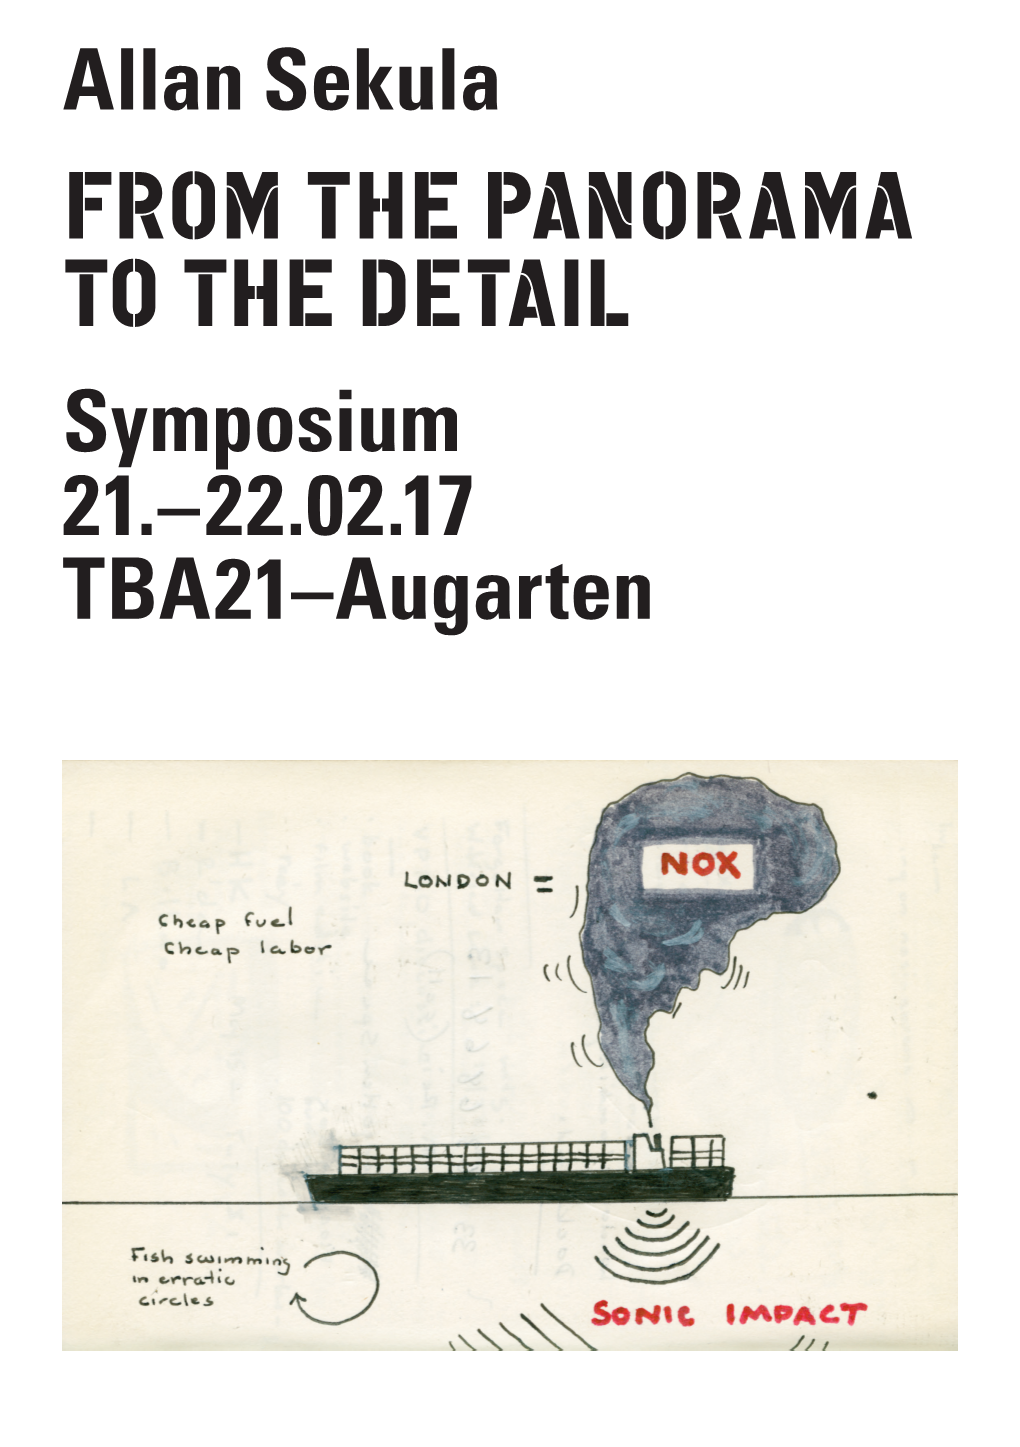 FROM the PANORAMA to the DETAIL Symposium 21.–22.02.17 TBA21–Augarten Allan Sekula: from the Panorama to the Detail